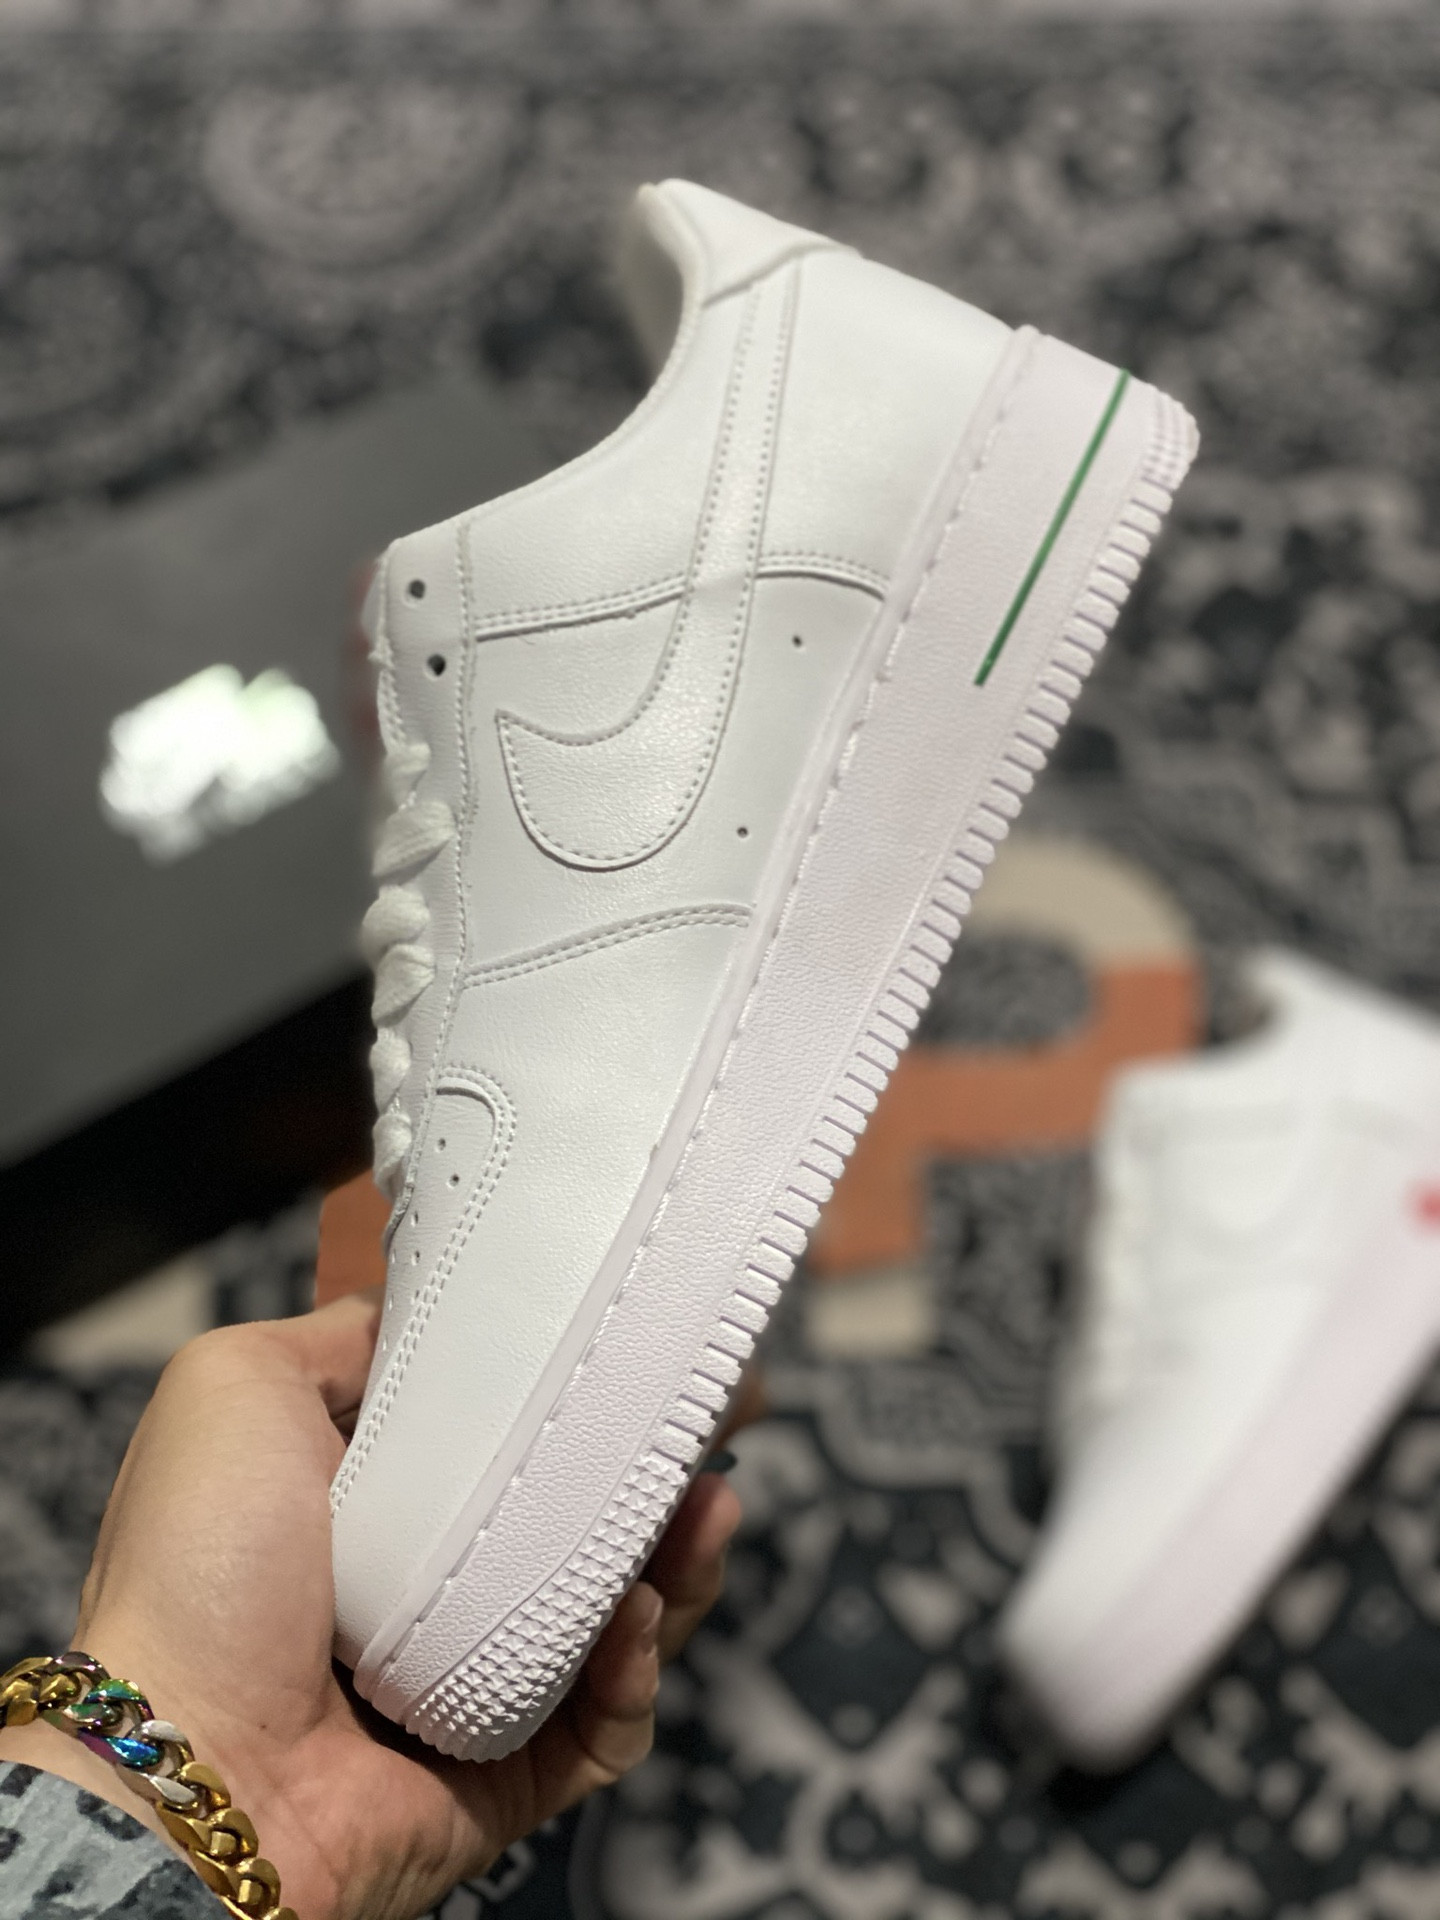 Nike Air Force 1 Low Rose White University Red-Pine Green For Sale